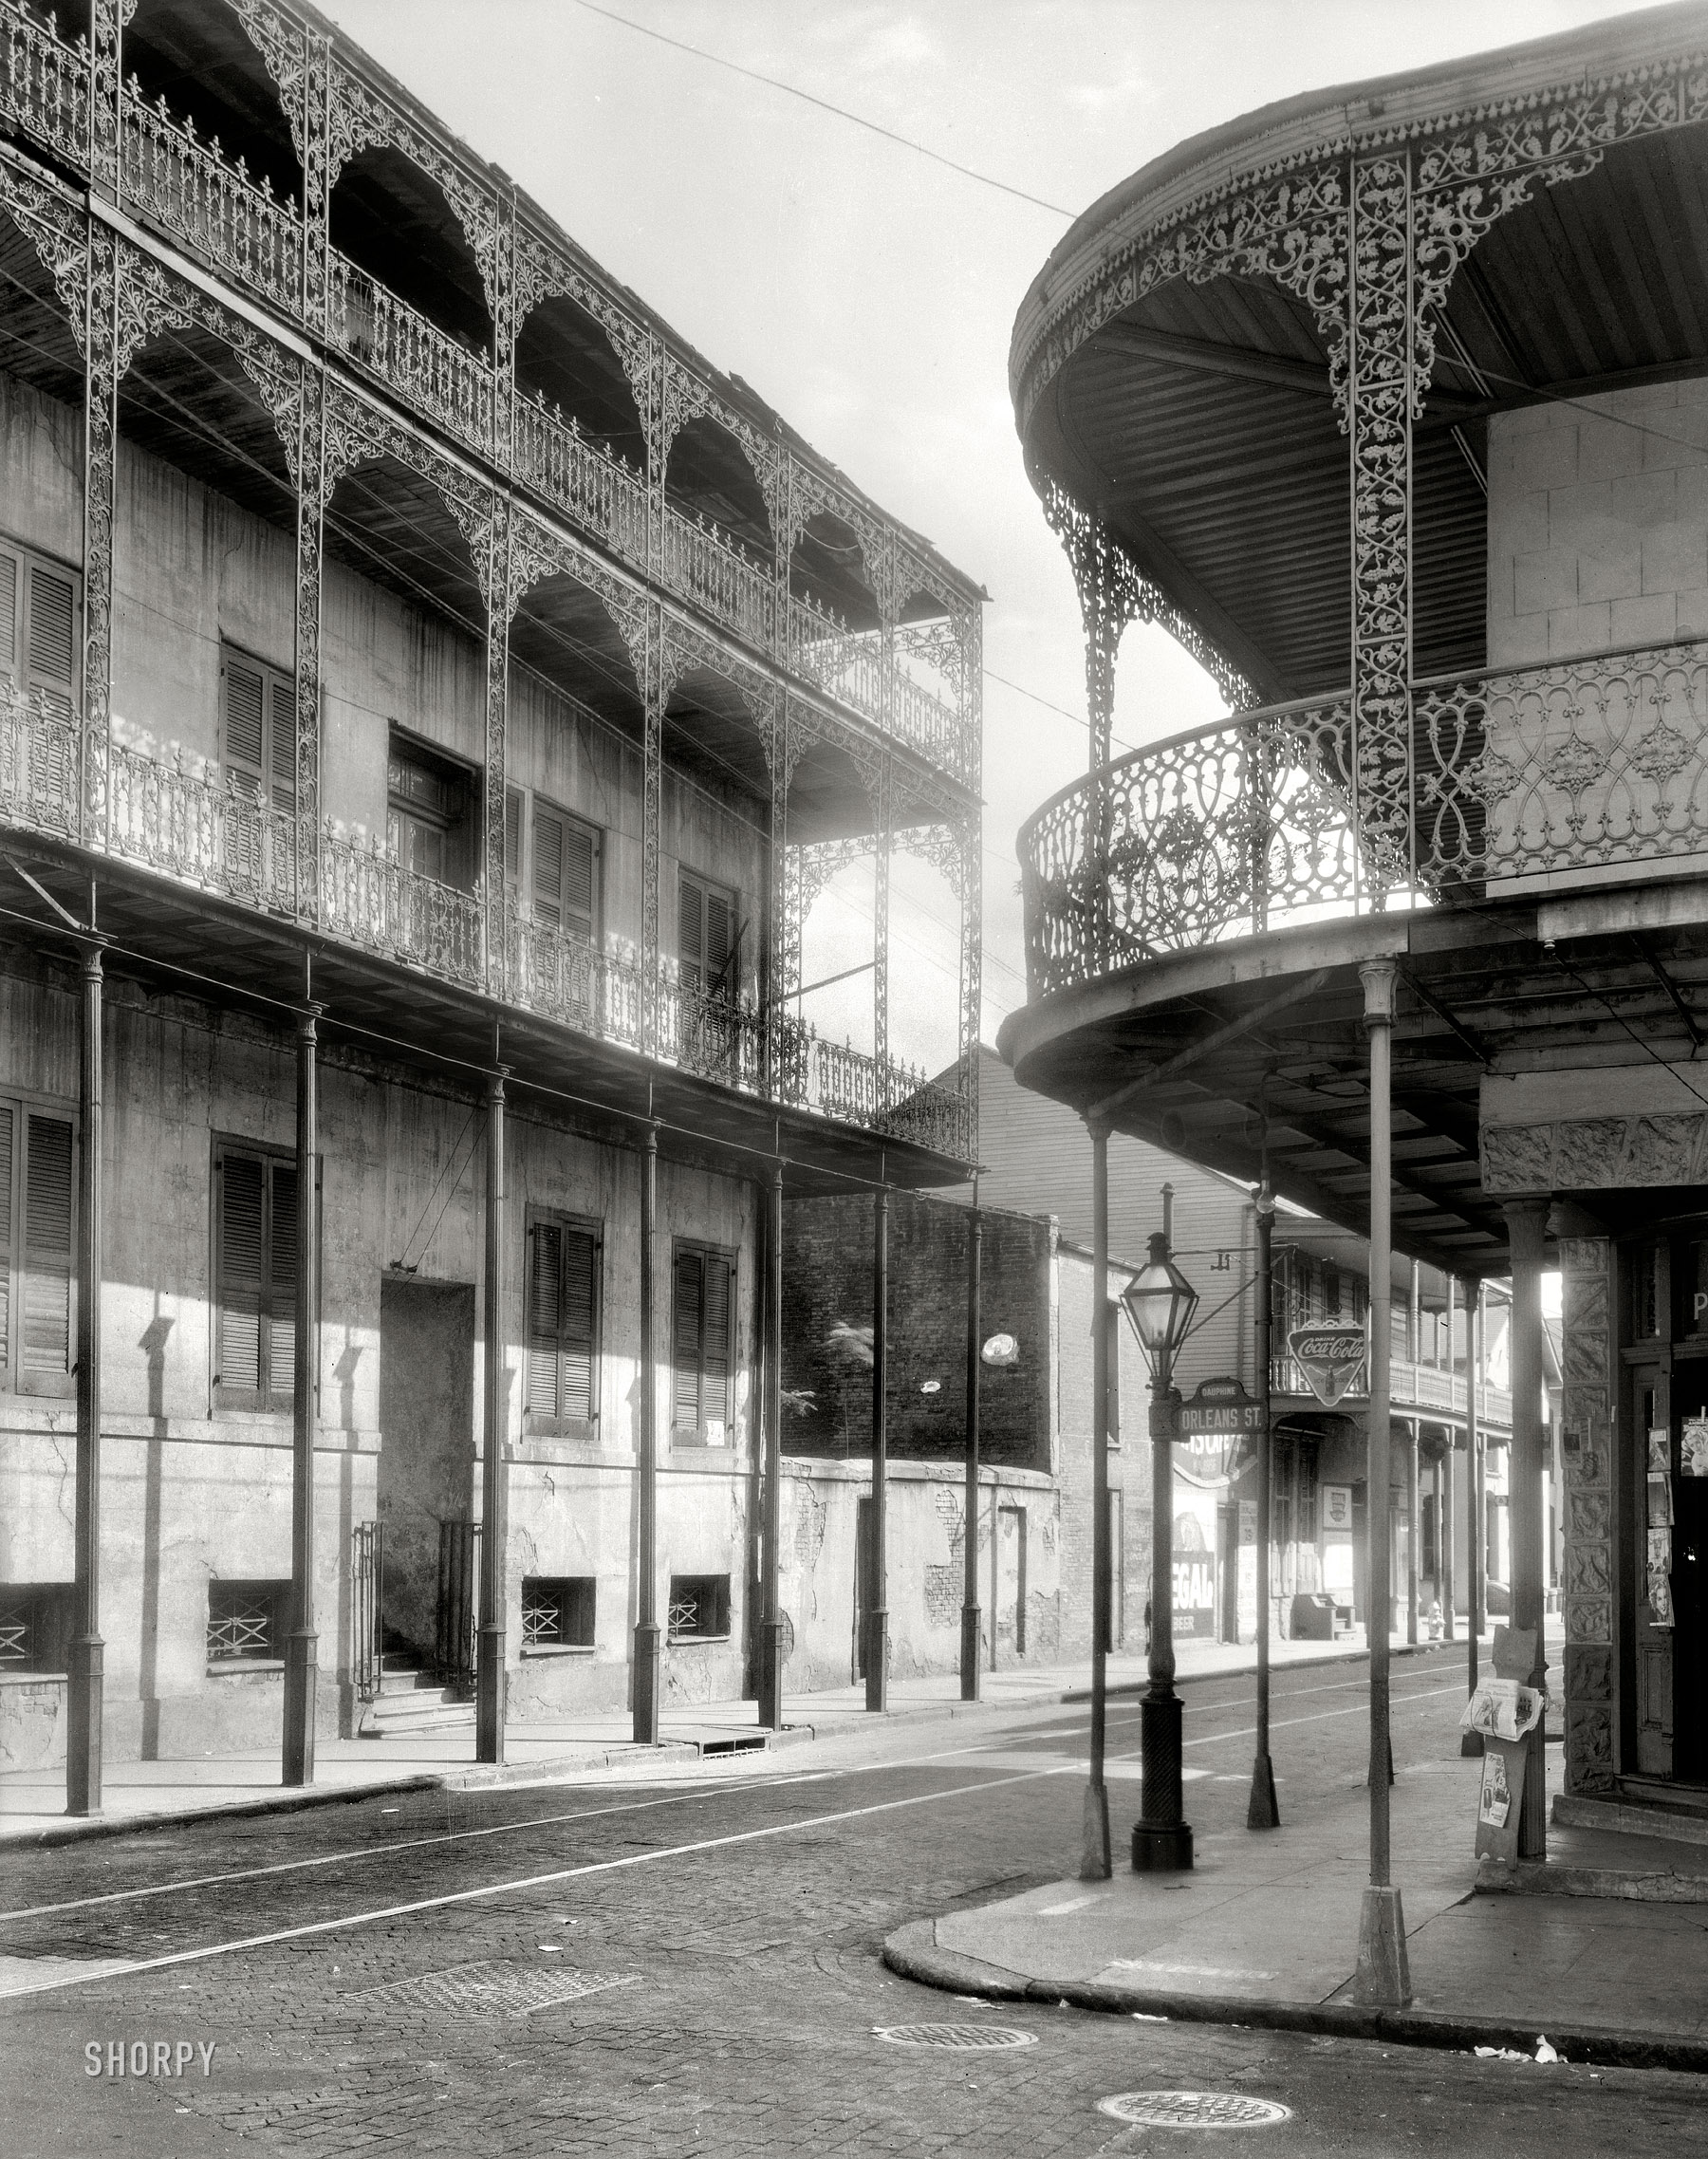 New Orleans, 1937. "Le Pretre Mansion, 716 Dauphine Street, built 1835-6. Joseph Saba house. Also called House of the Turk." As well as the Sultan's Palace. 8x10 inch acetate negative by Frances Benjamin Johnston. View full size.